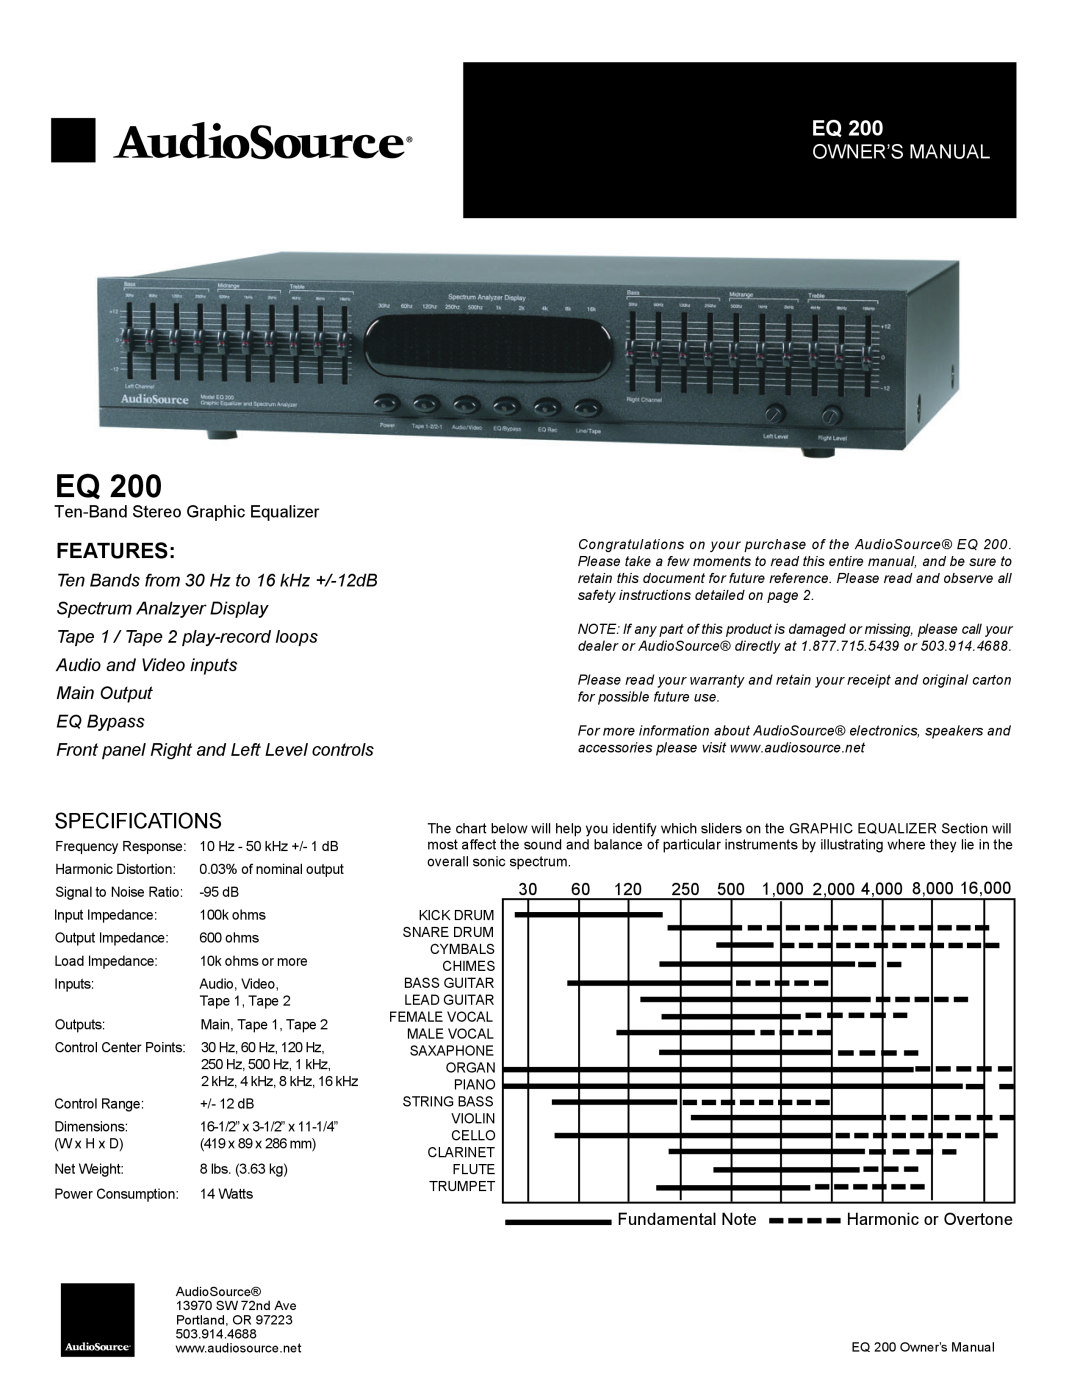 AudioSource EQ200 owner manual Features, Specifications, Ten-BandStereo Graphic Equalizer, Main Output EQ Bypass 